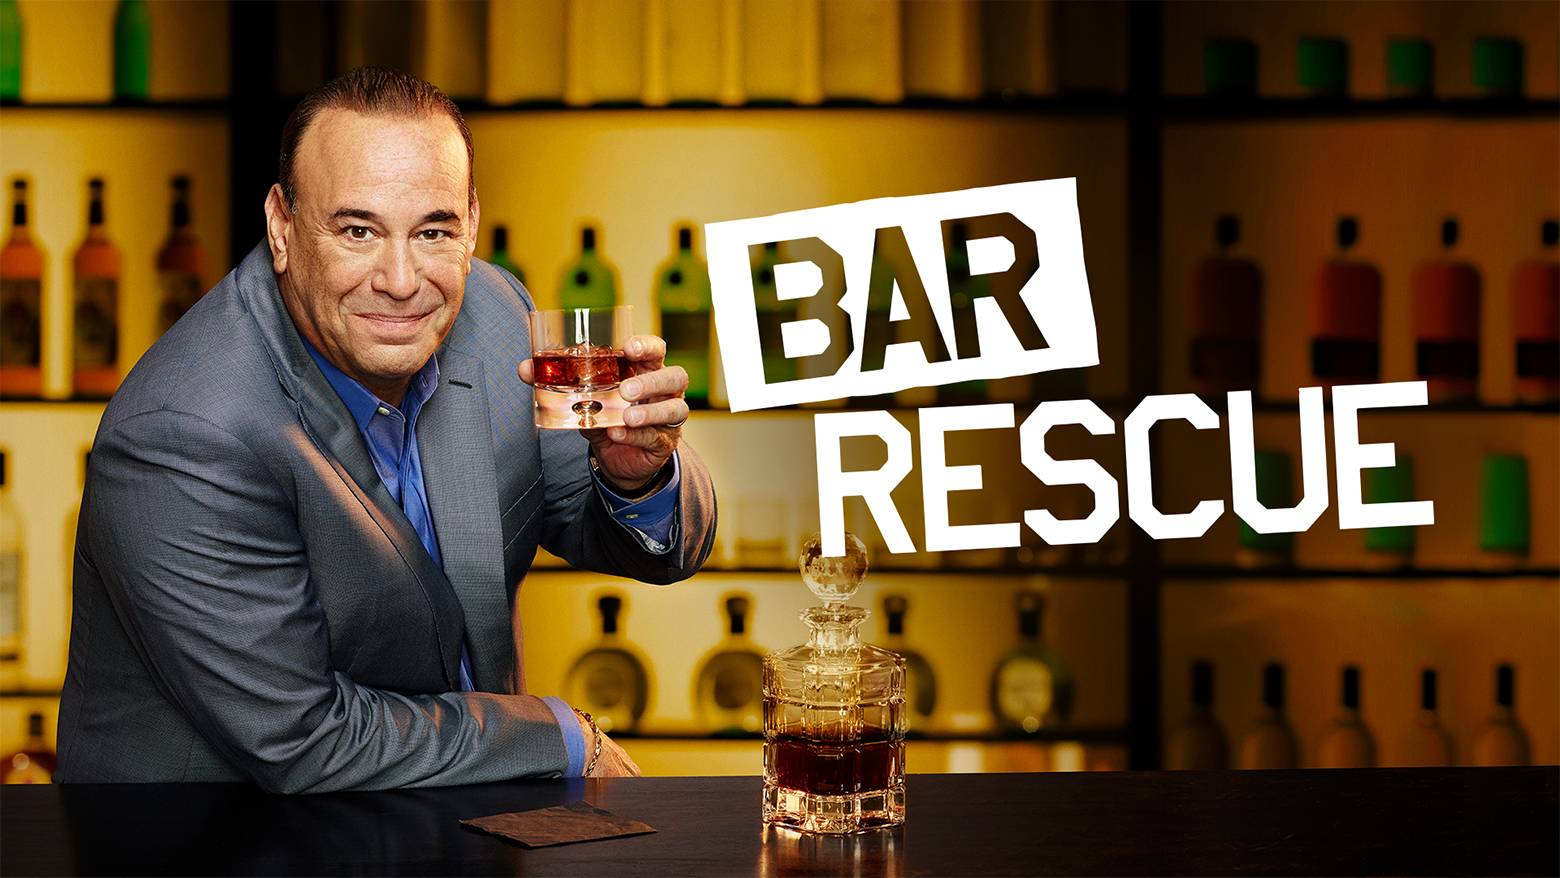 Watch The Bar Rescue Channel On Pluto TV